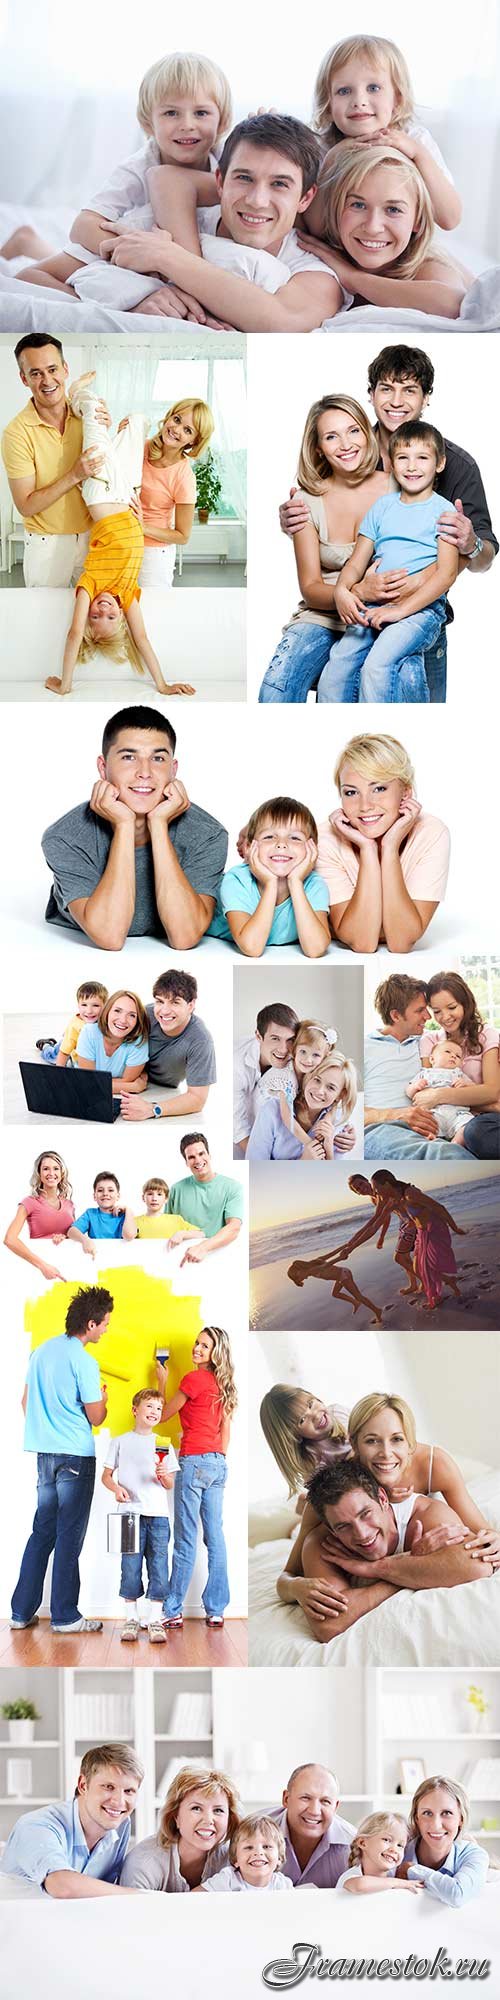 Young happy family of raster graphics - 2